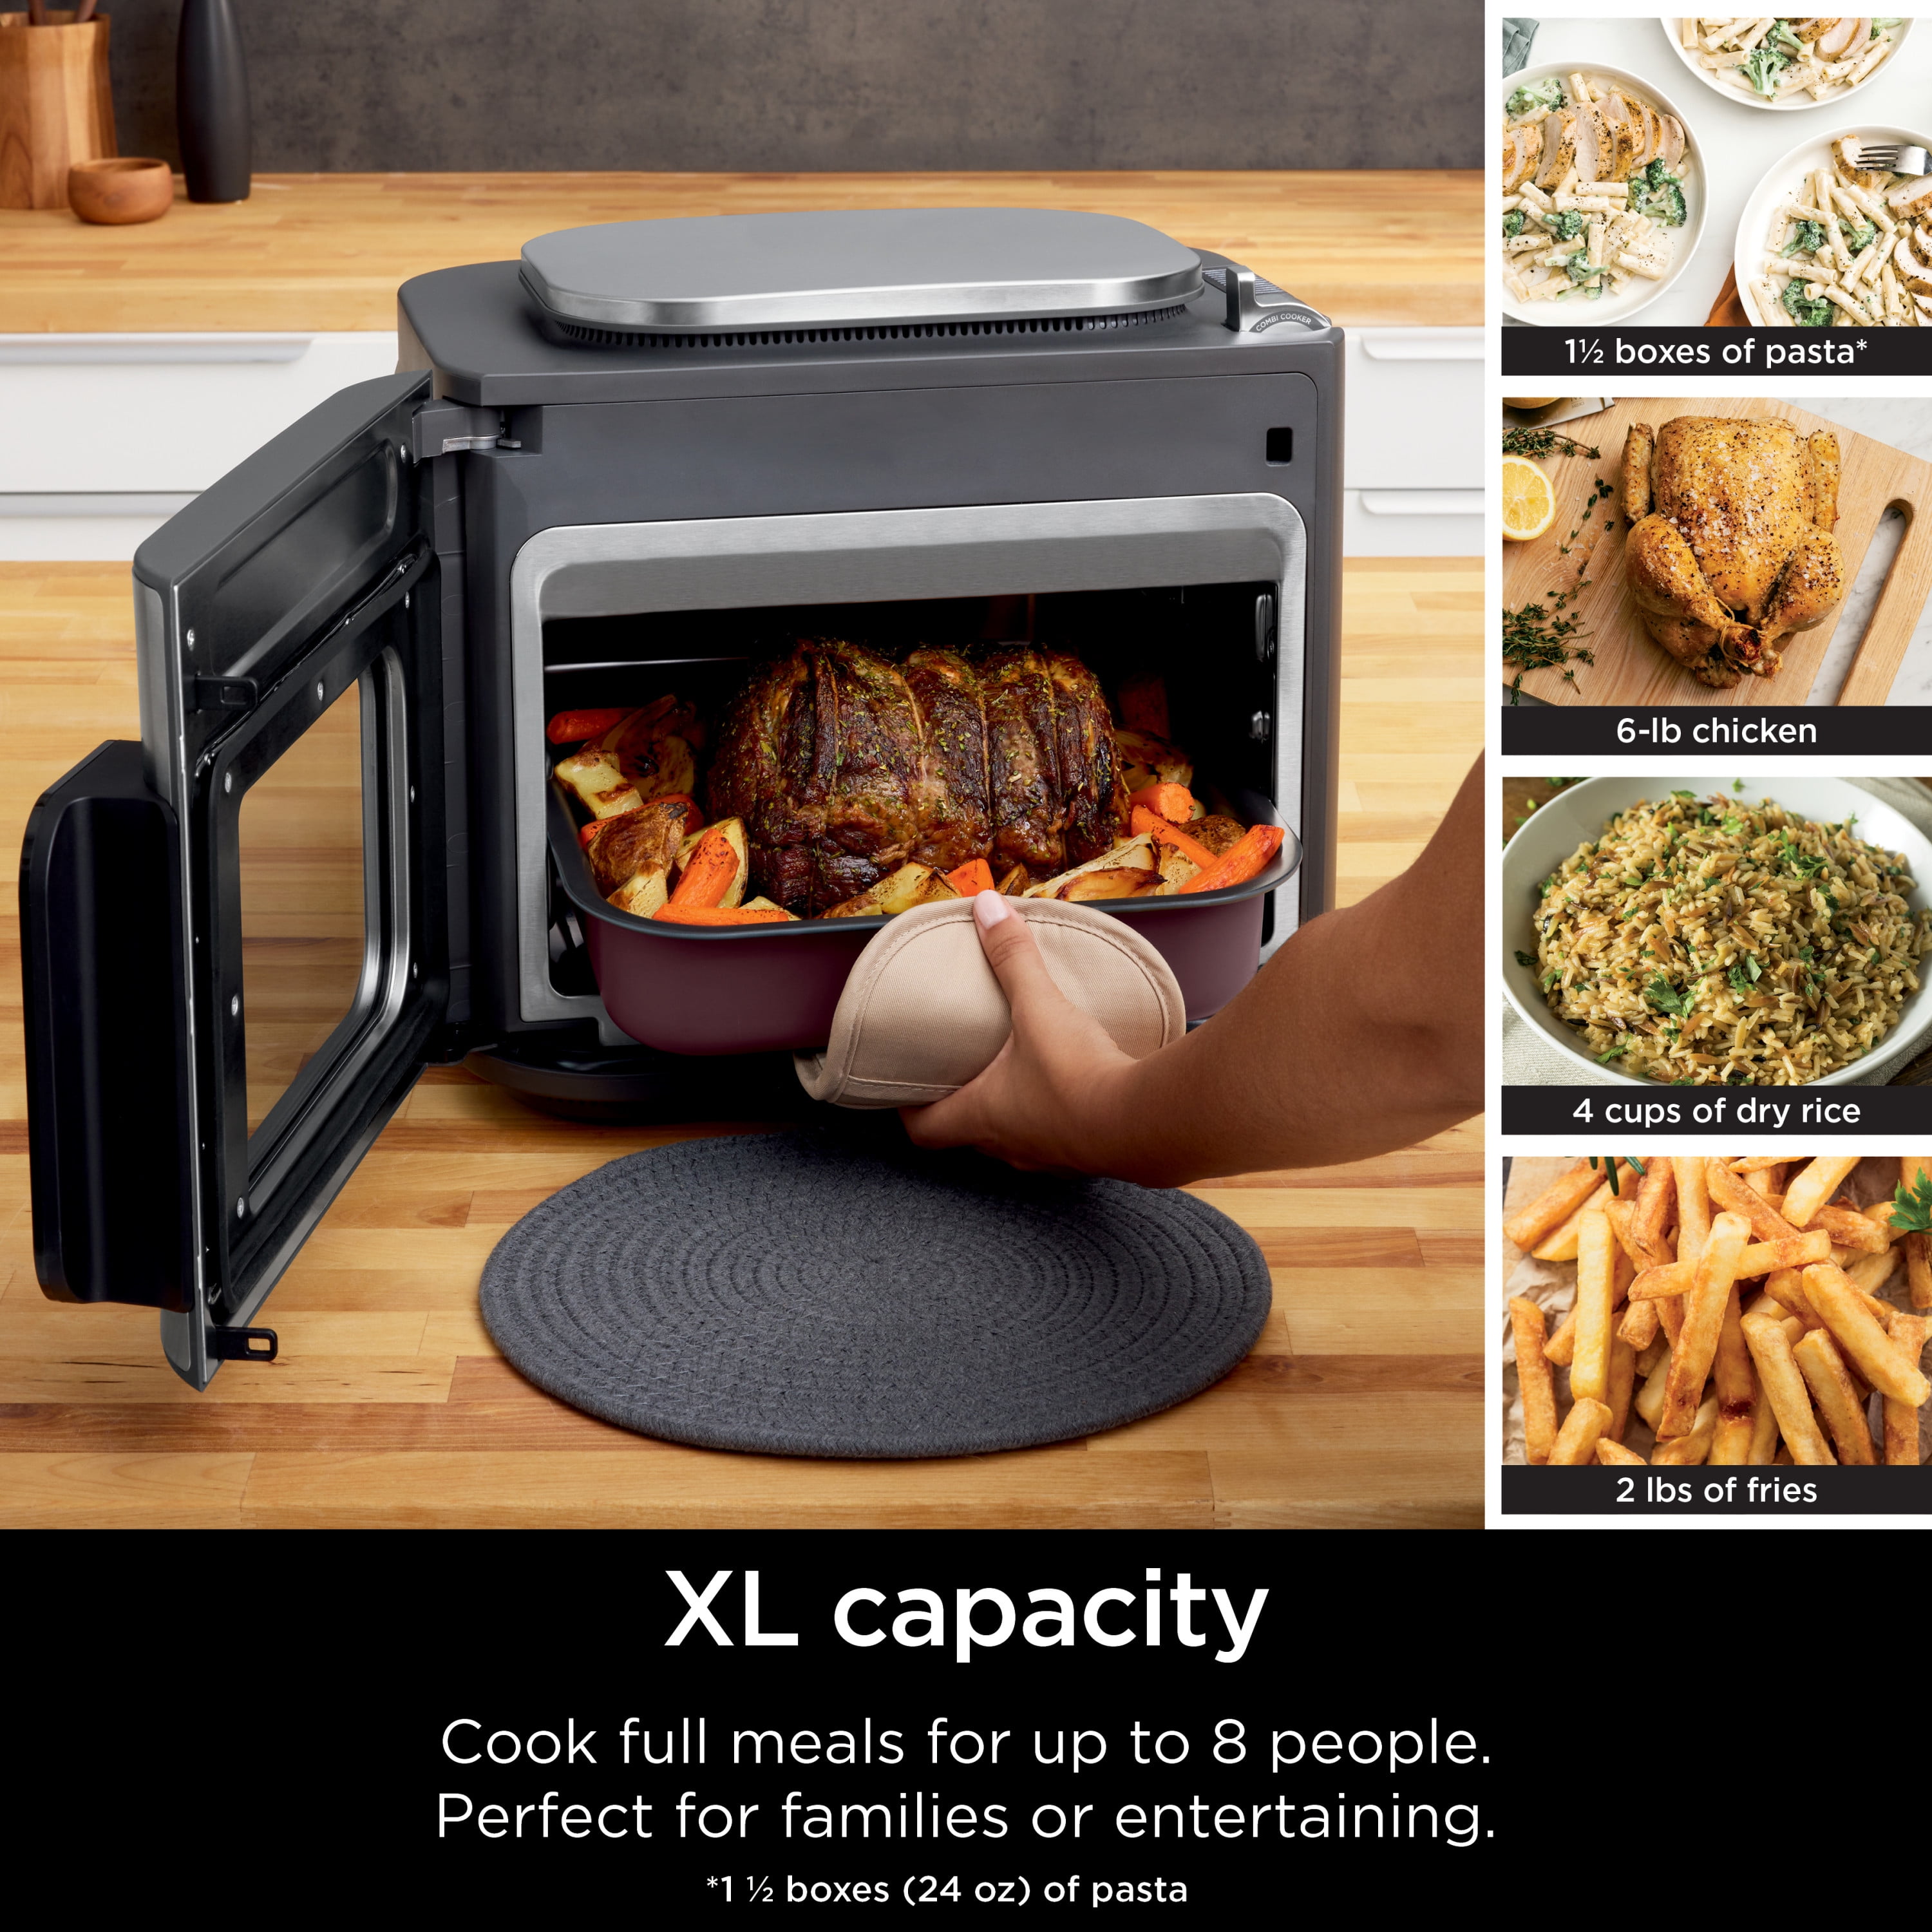 Ninja Combi All-In-One Multicooker, Oven & Air Fryer with Recipe Guide